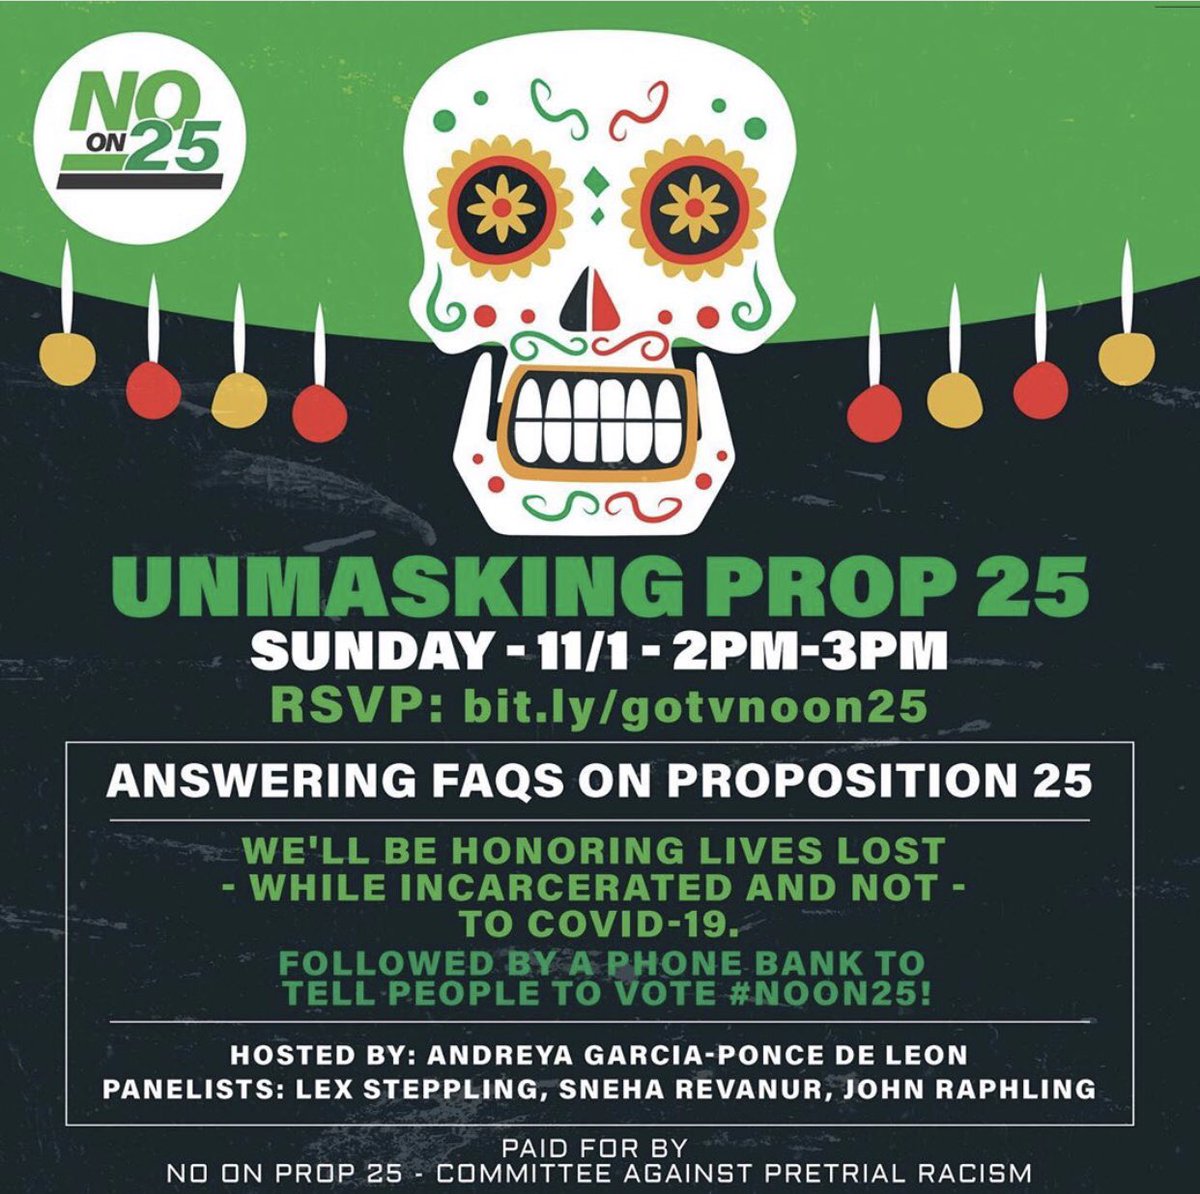 Ok, last thing and then I gotta mute this cause I can’t keep up with the notifications.  @ReformLAJails will be discussing Prop 25 tomorrow at 1pm. Whether you’re for, against it, or unsure, you should attend & get your questions answered. Register here:  https://us02web.zoom.us/meeting/register/tZUpf-iprTwtE92Y927o9Bcan_2dkHoULNk2